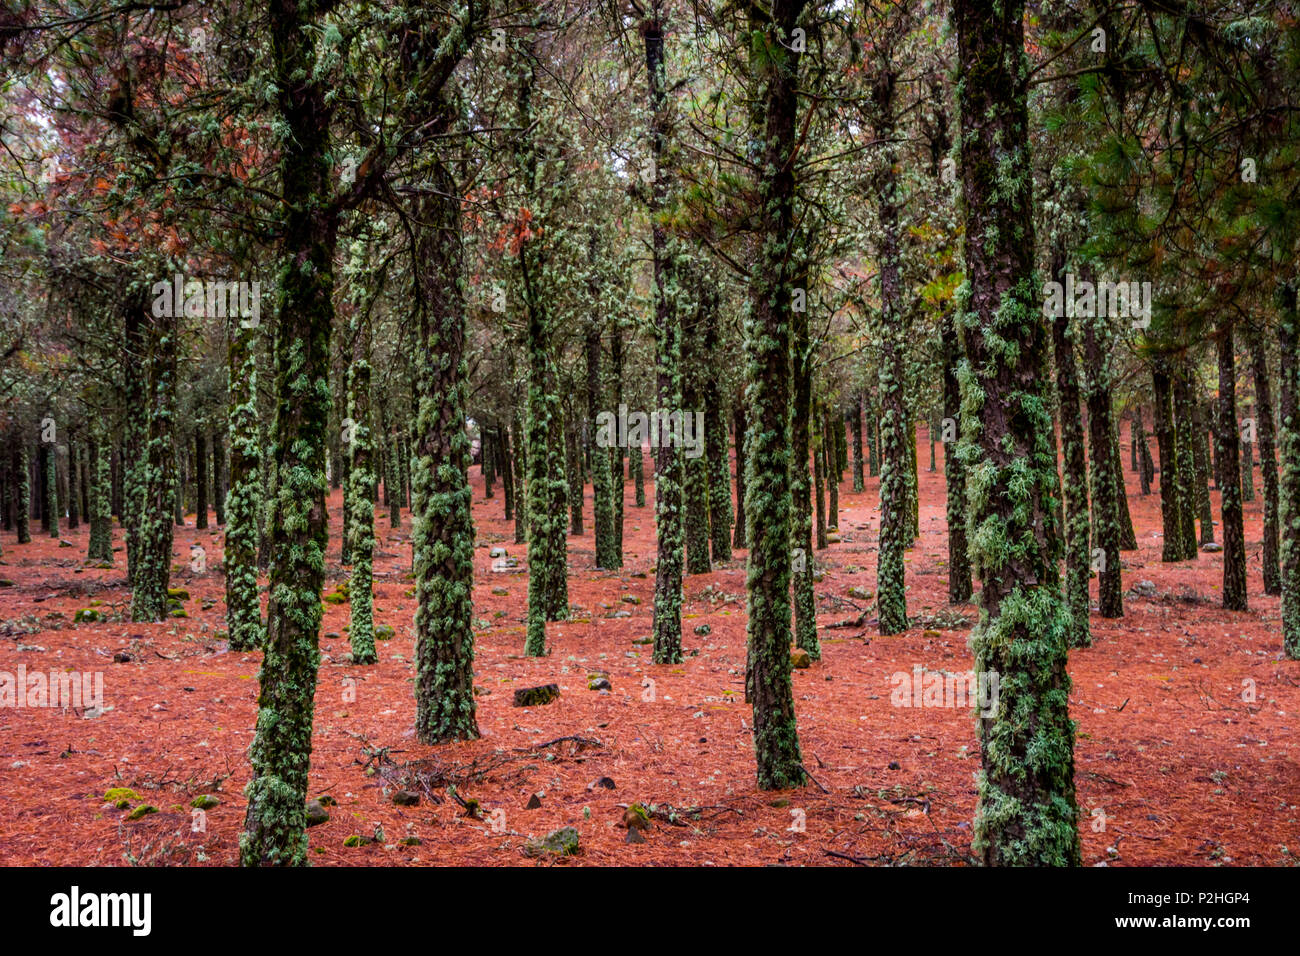 Contrast of lichen on tree trunks and red pine needles on the ground, forest in Gran Canaria, Spain Stock Photo